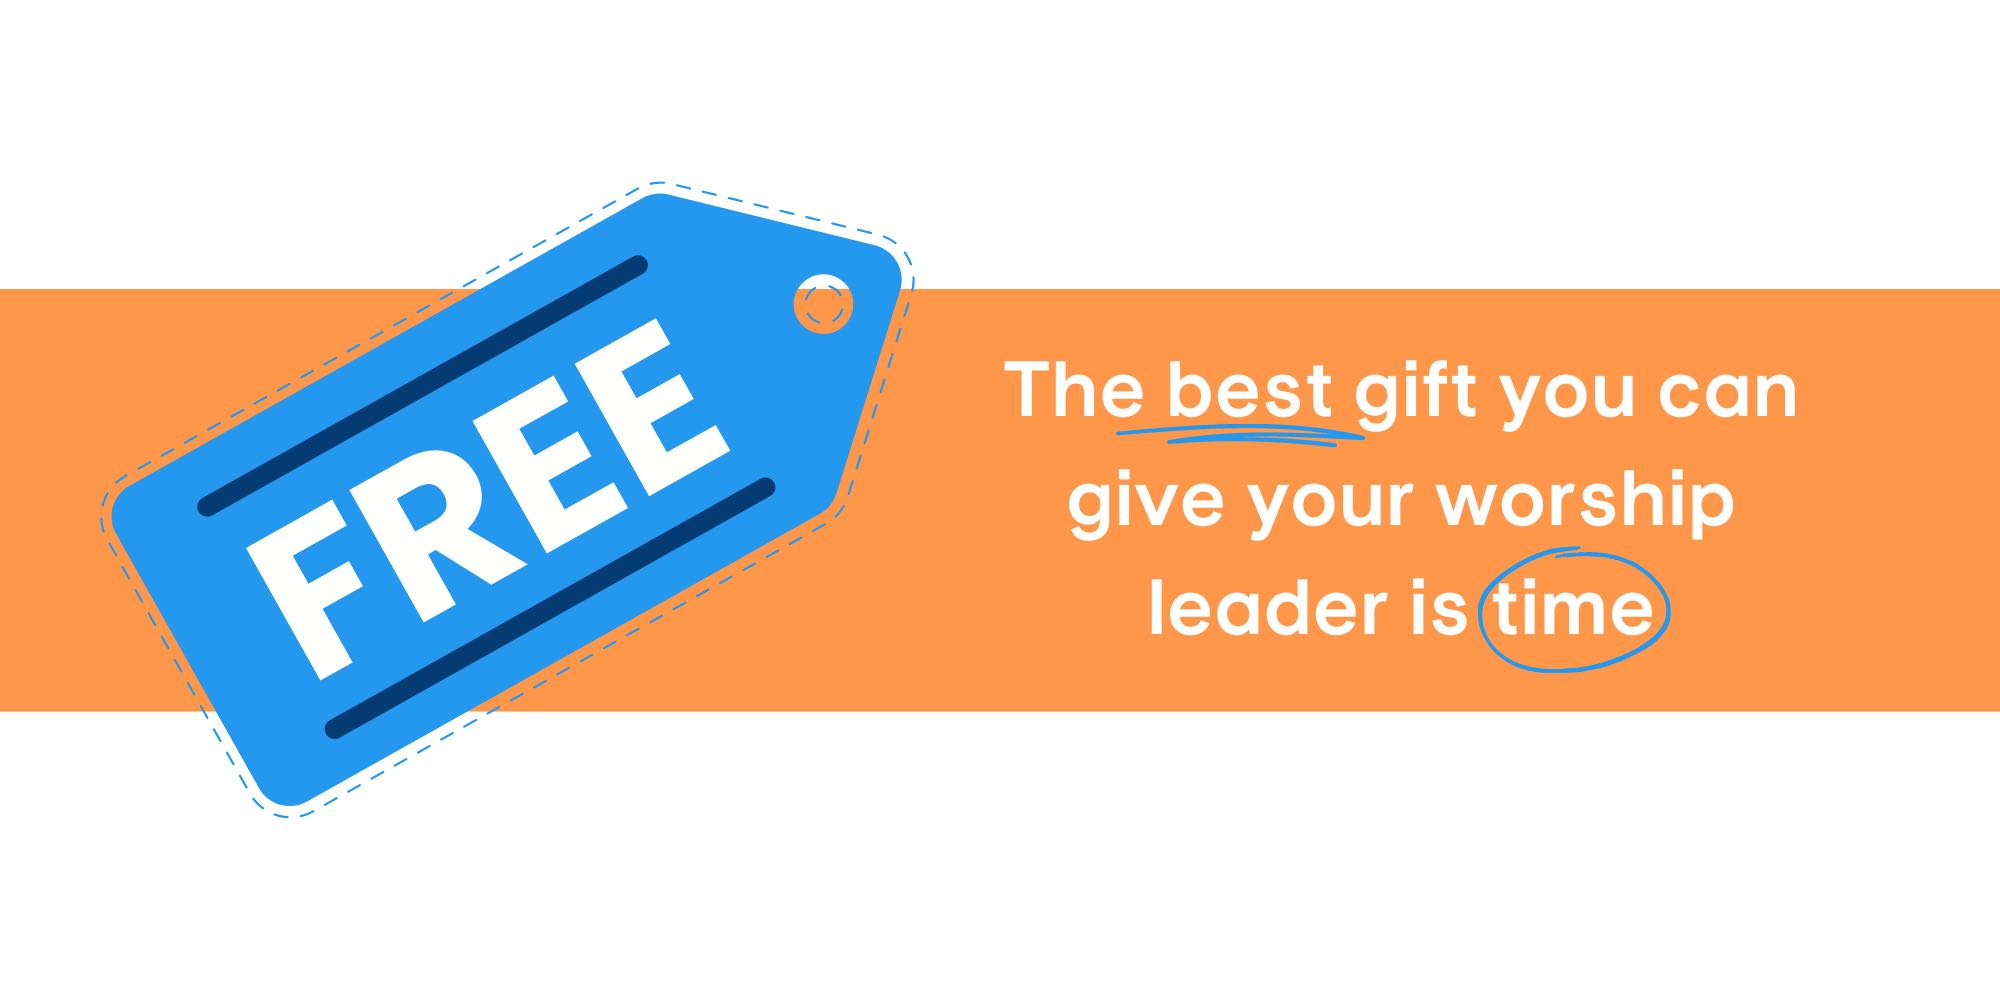 Free gifts for your worship leader can be the best gifts